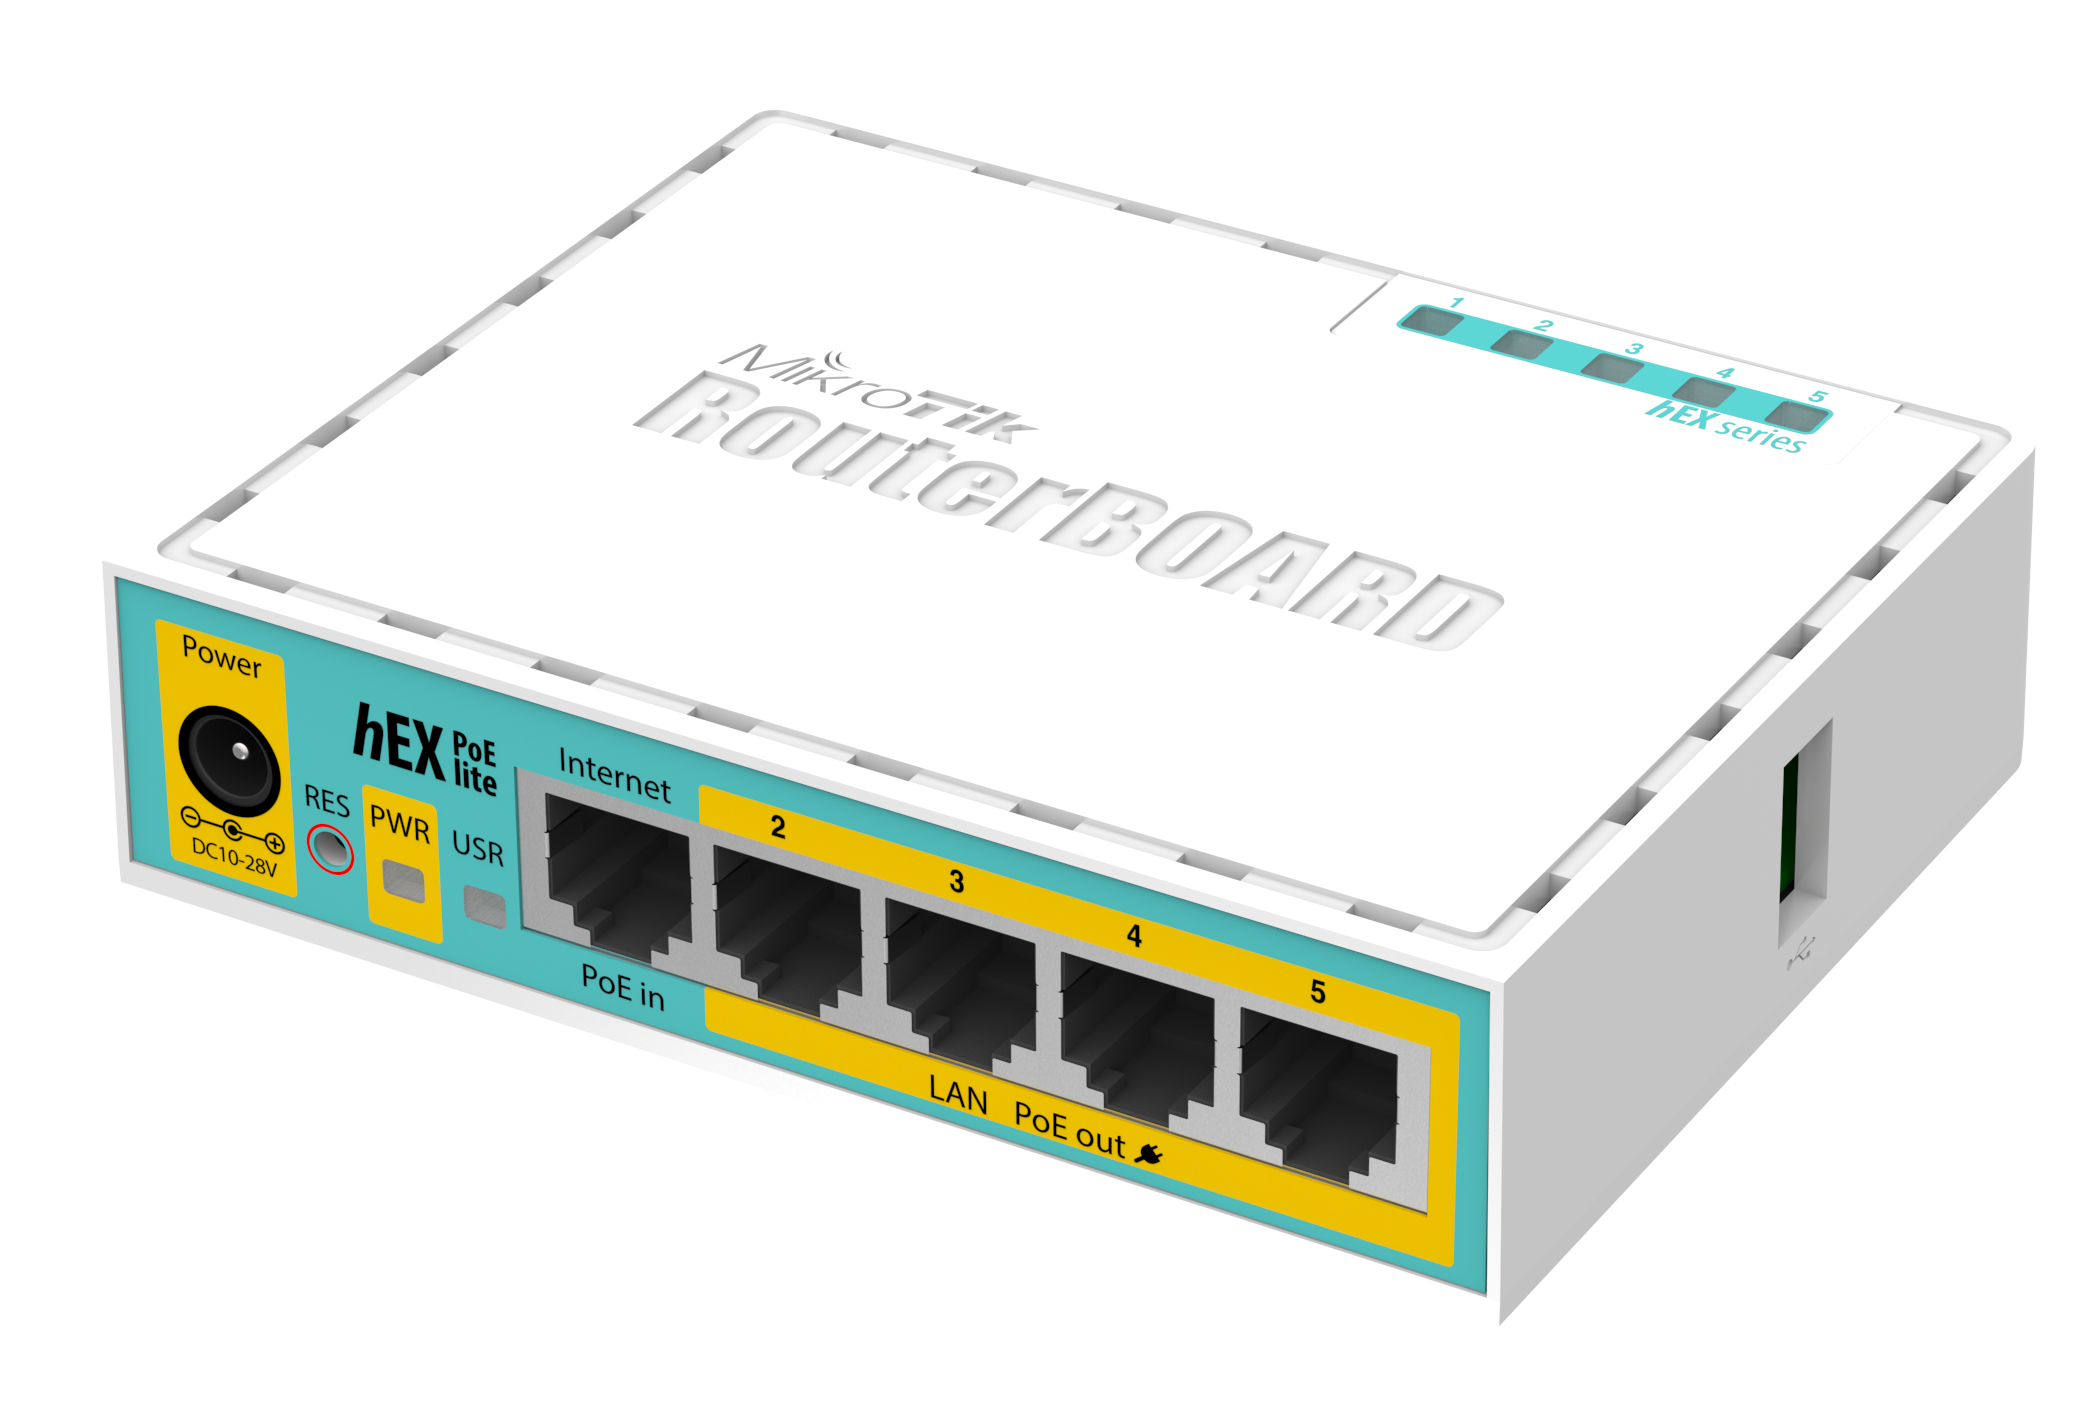 RB750UPr2 4+1 Poe Out Router Switch